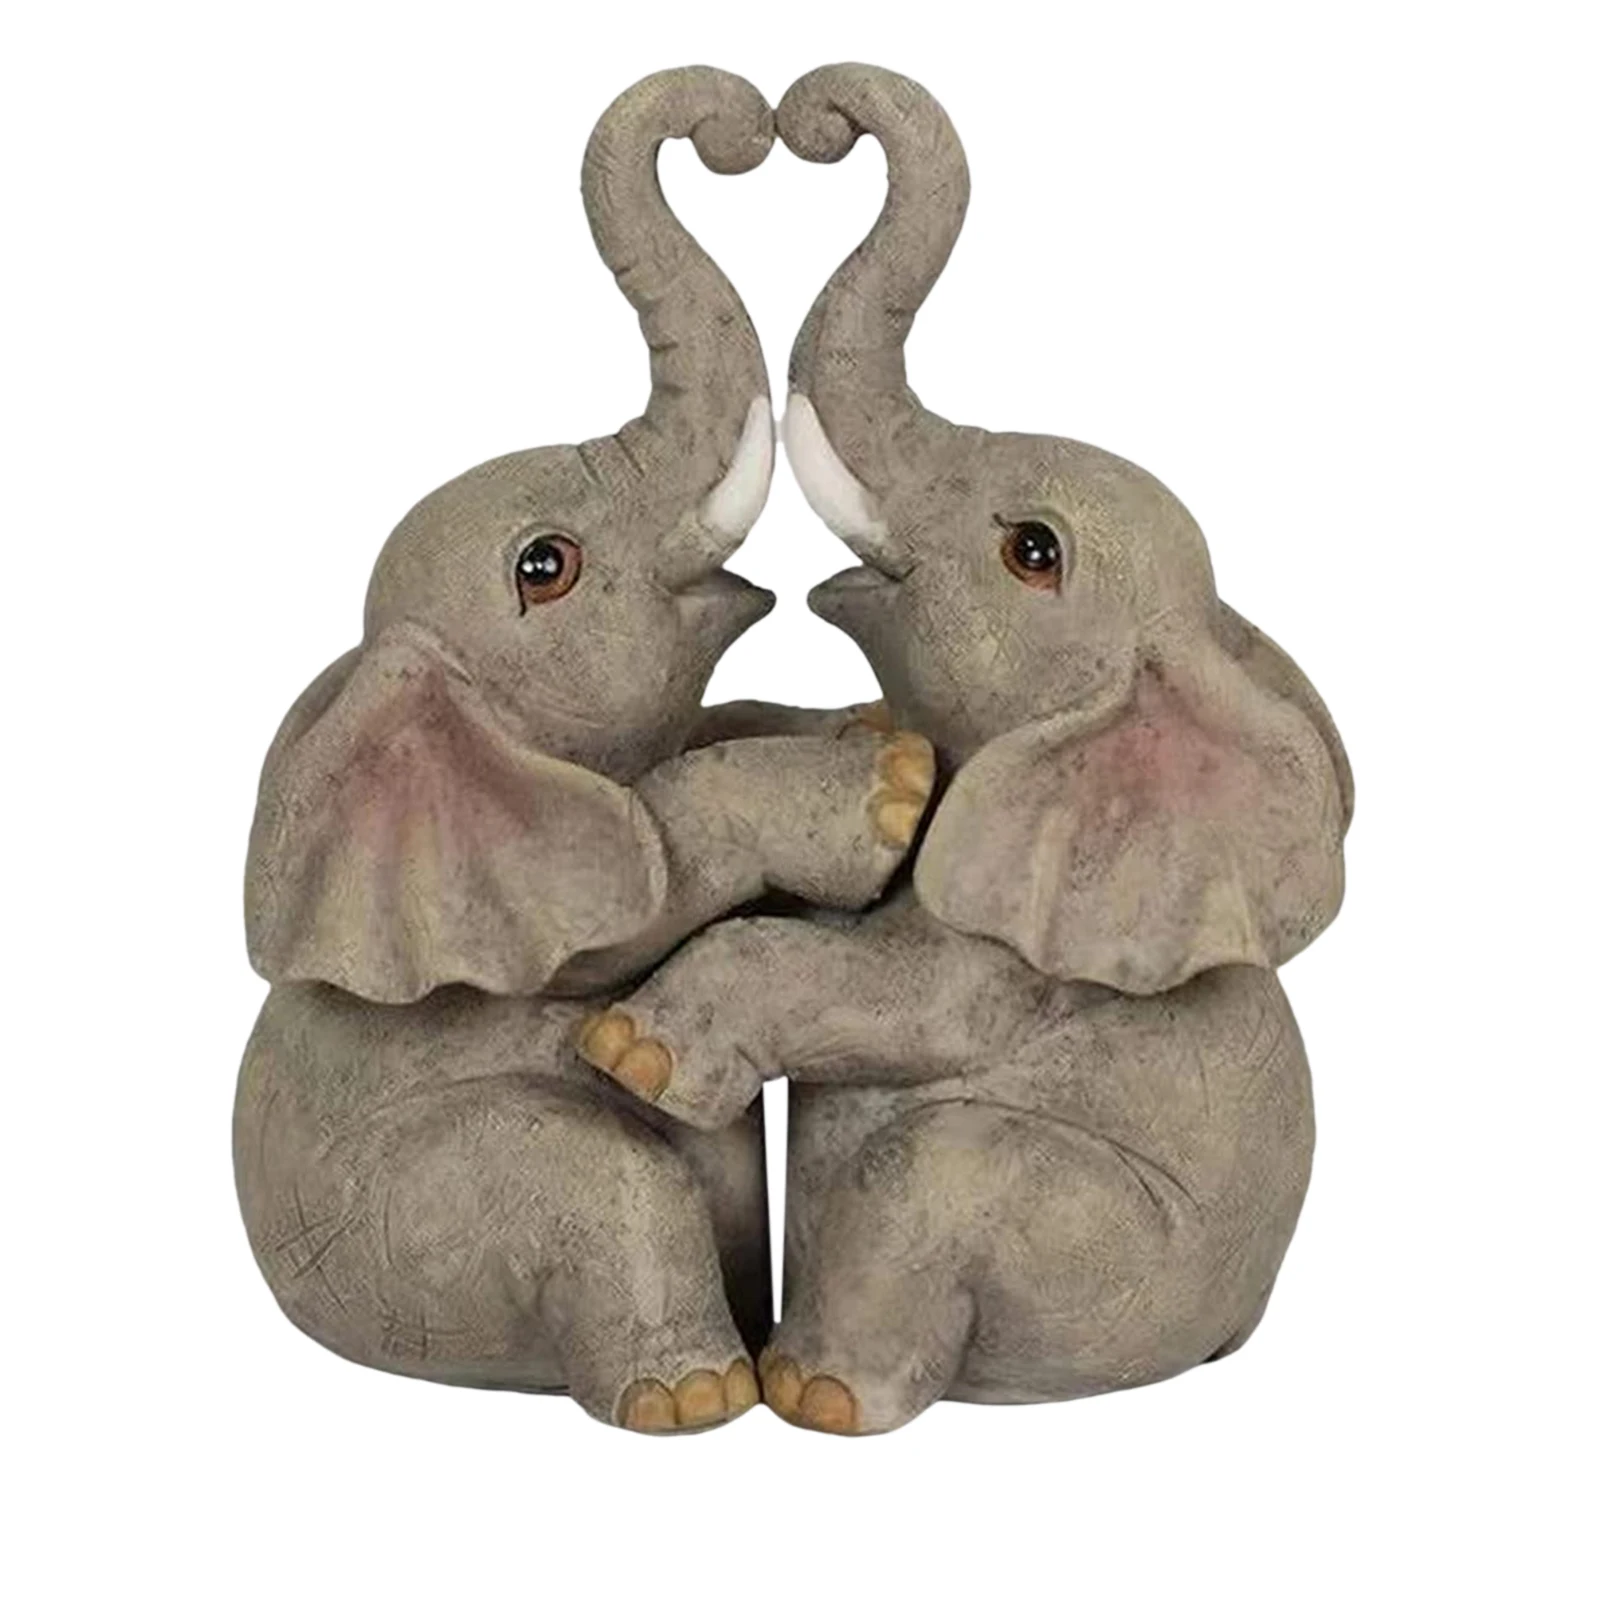 

Elephant Ornaments Decorative Elephant Hugging Sculptures Romantic Animal Loving Couple Statues With Entwined Trunks